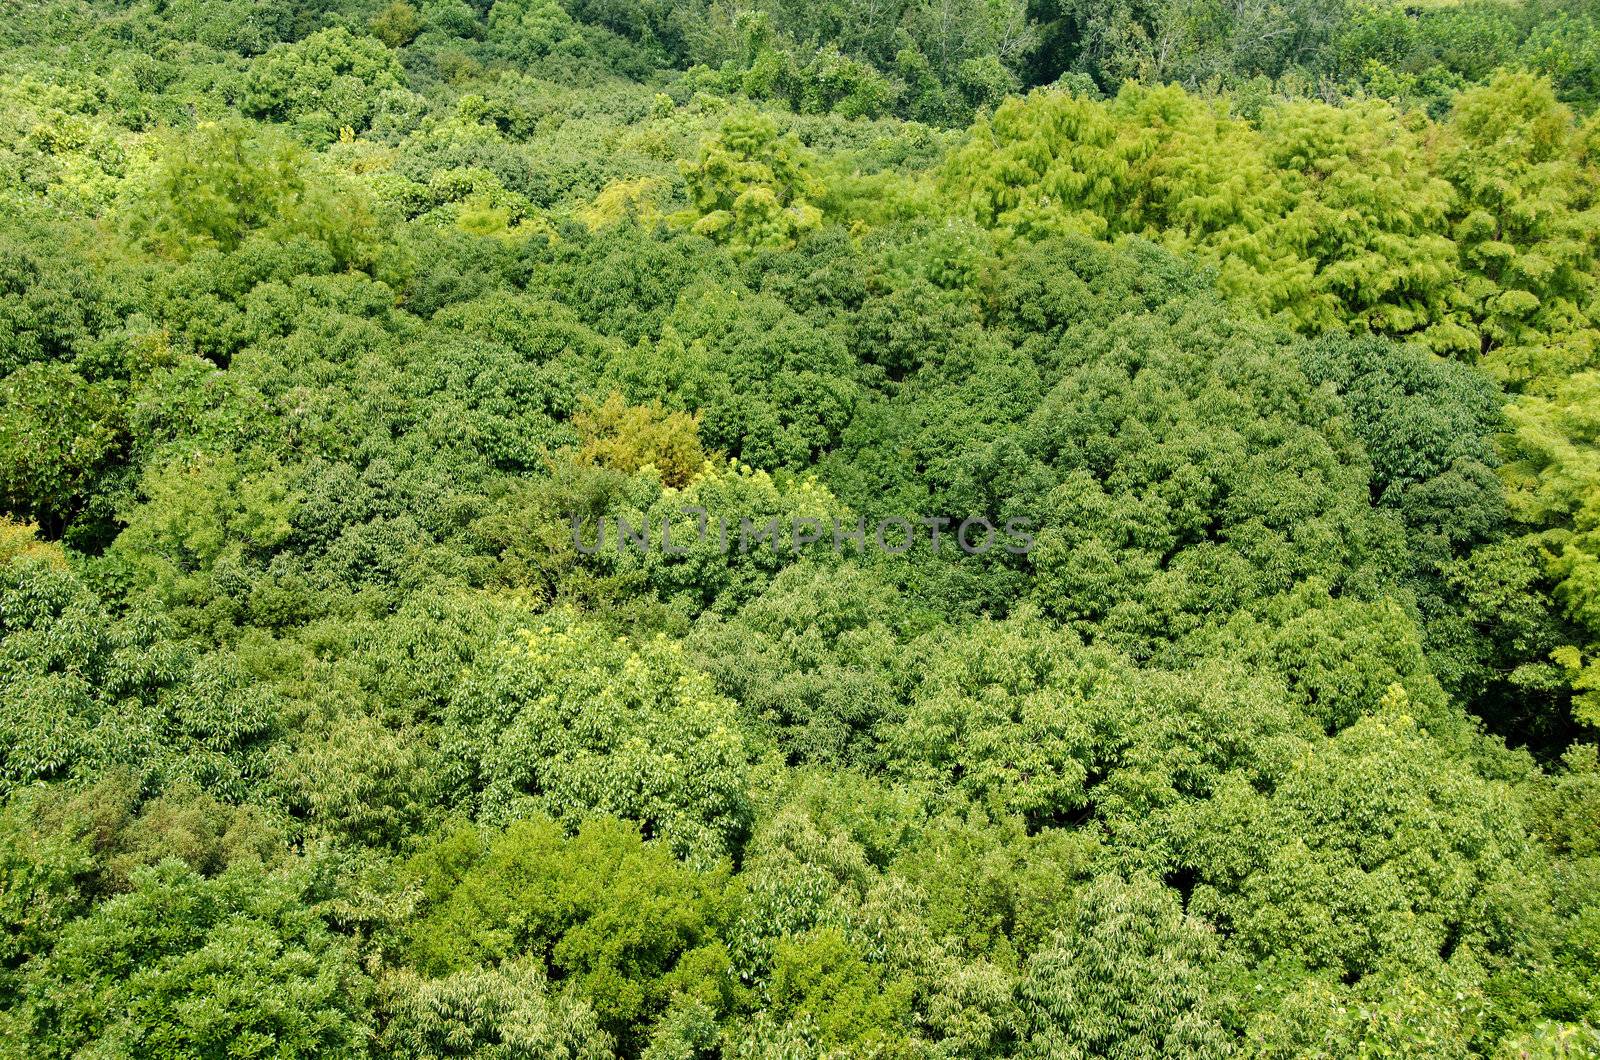 Japanese deciduous forest canopy as seen from above in summer in Osaka, Japan